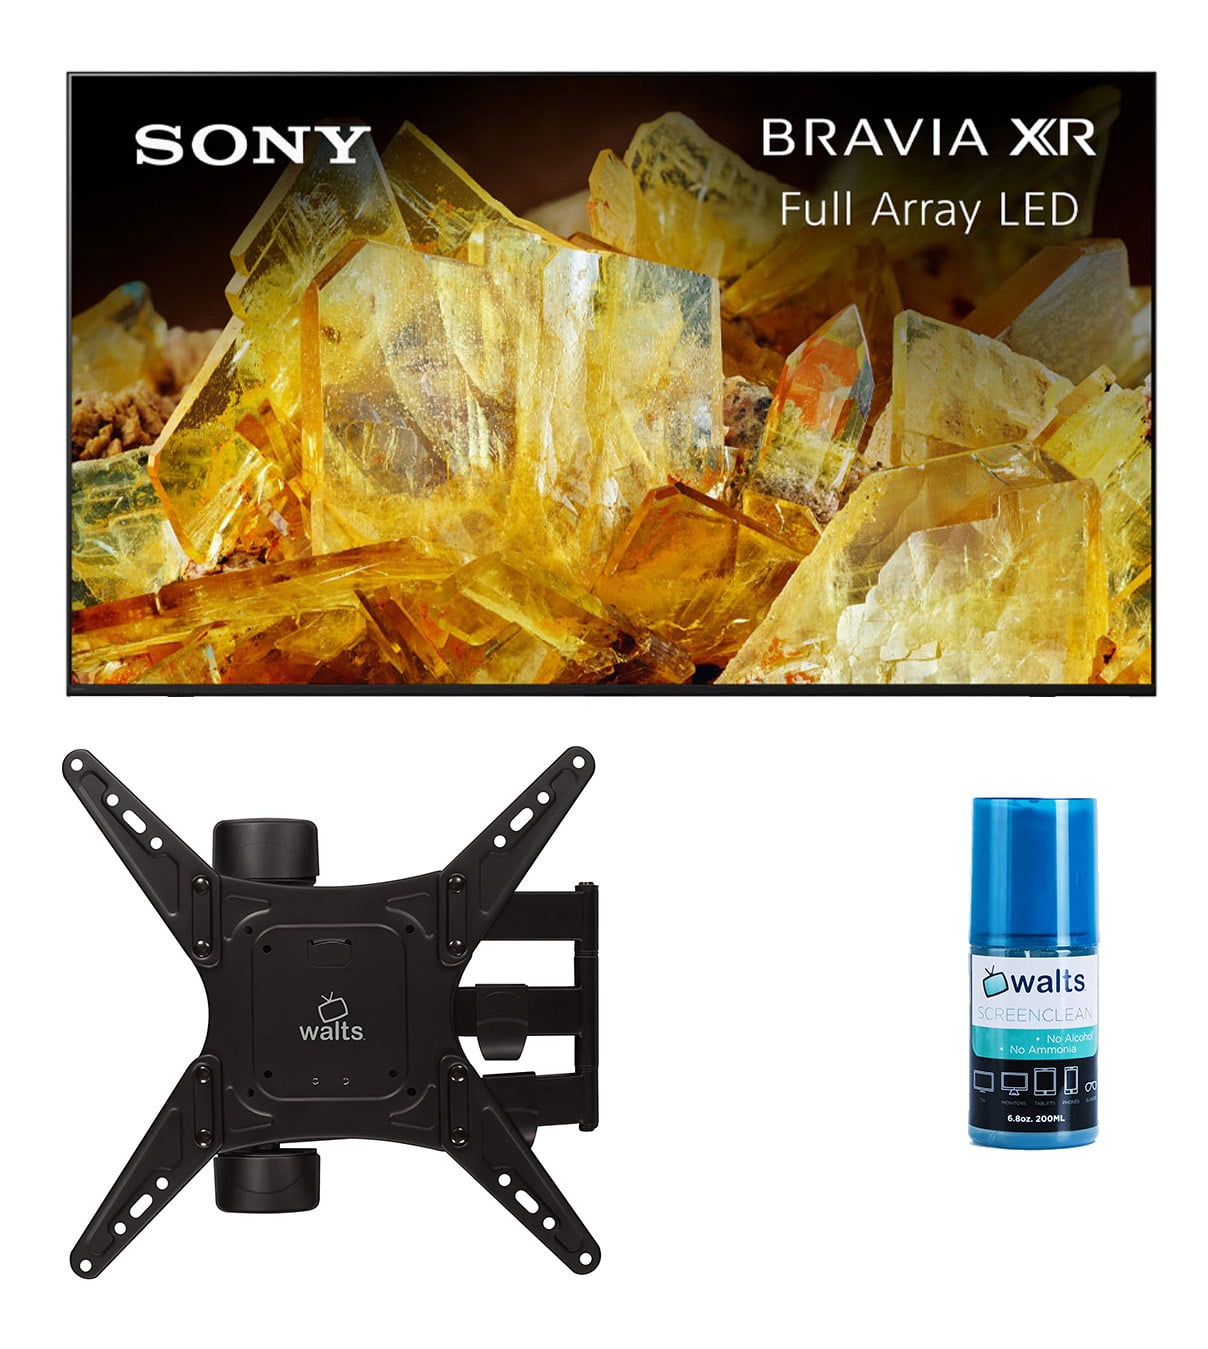 Sony XR55X90L 55 Inch 4K BRAVIA XR Full Array LED Smart Google TV with a  Walts TV Medium Full Motion Mount for 32 Inch-65 Inch Compatible TV's and  Walts HDTV Screen Cleaner